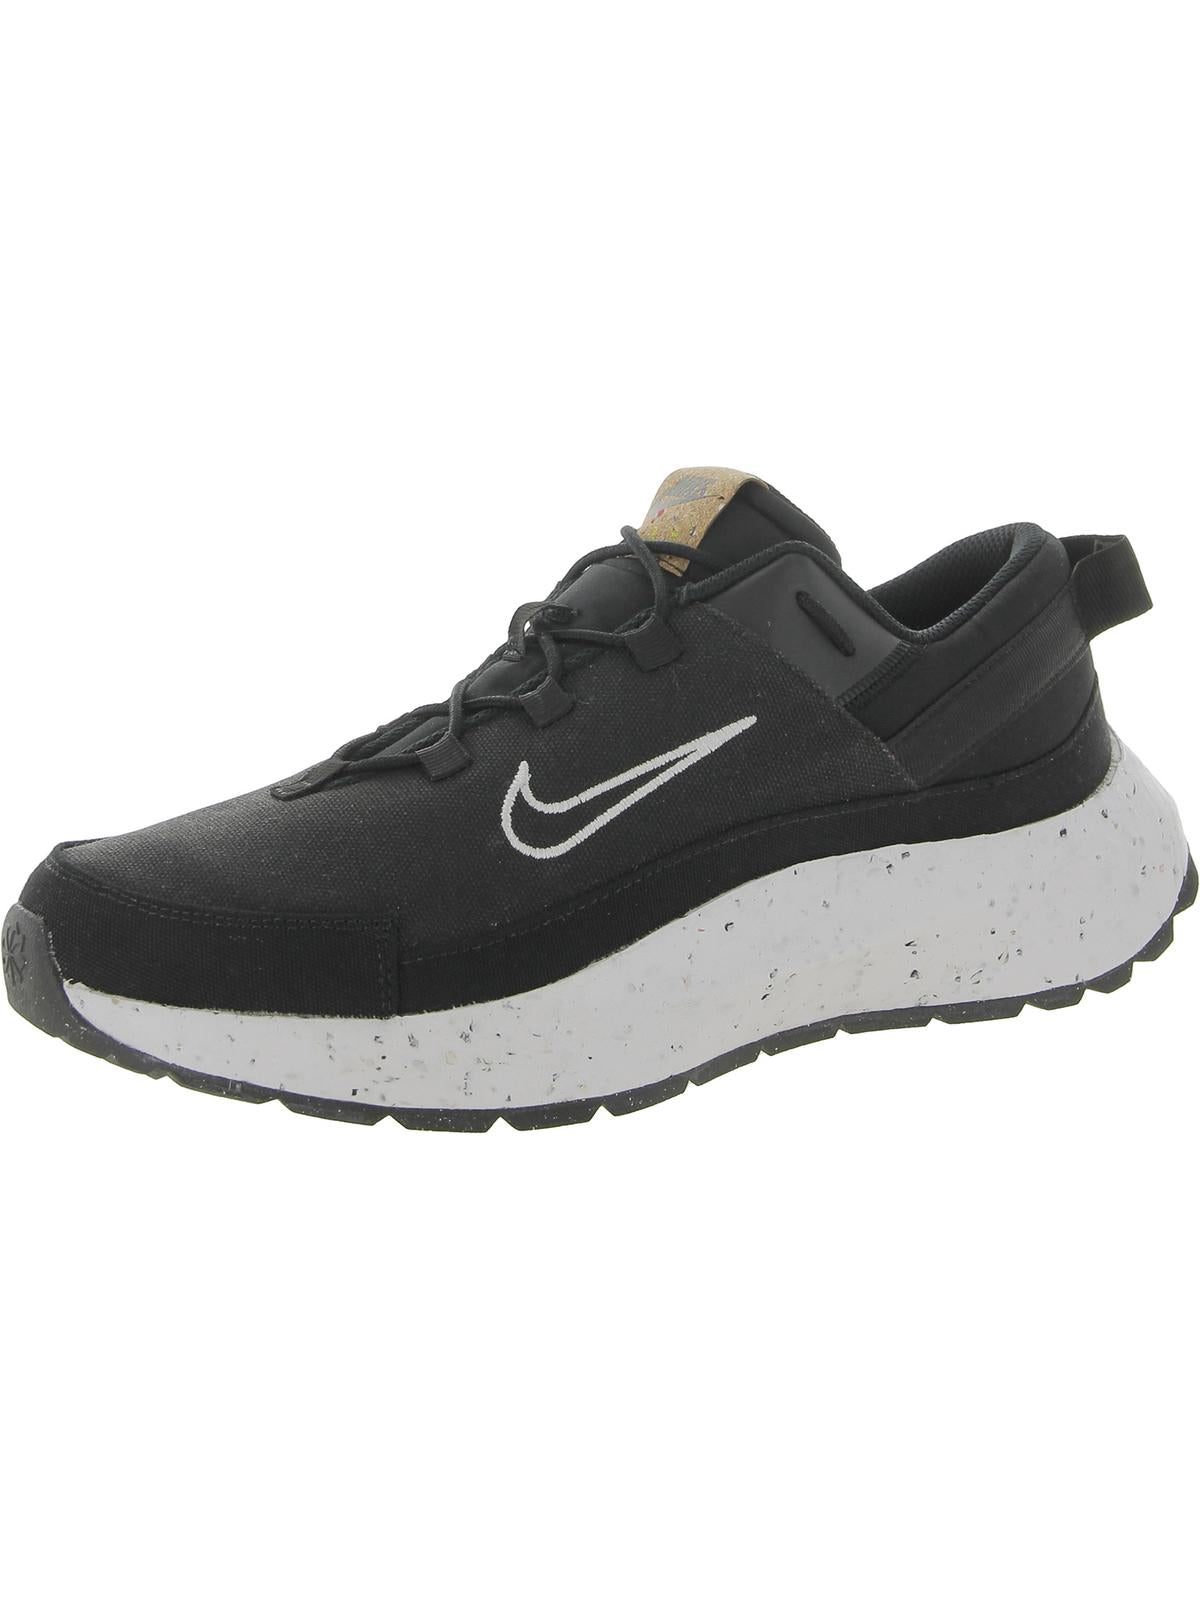 Nike Crater Remixa Fitness Workout Athletic and Training Shoes US 10 male